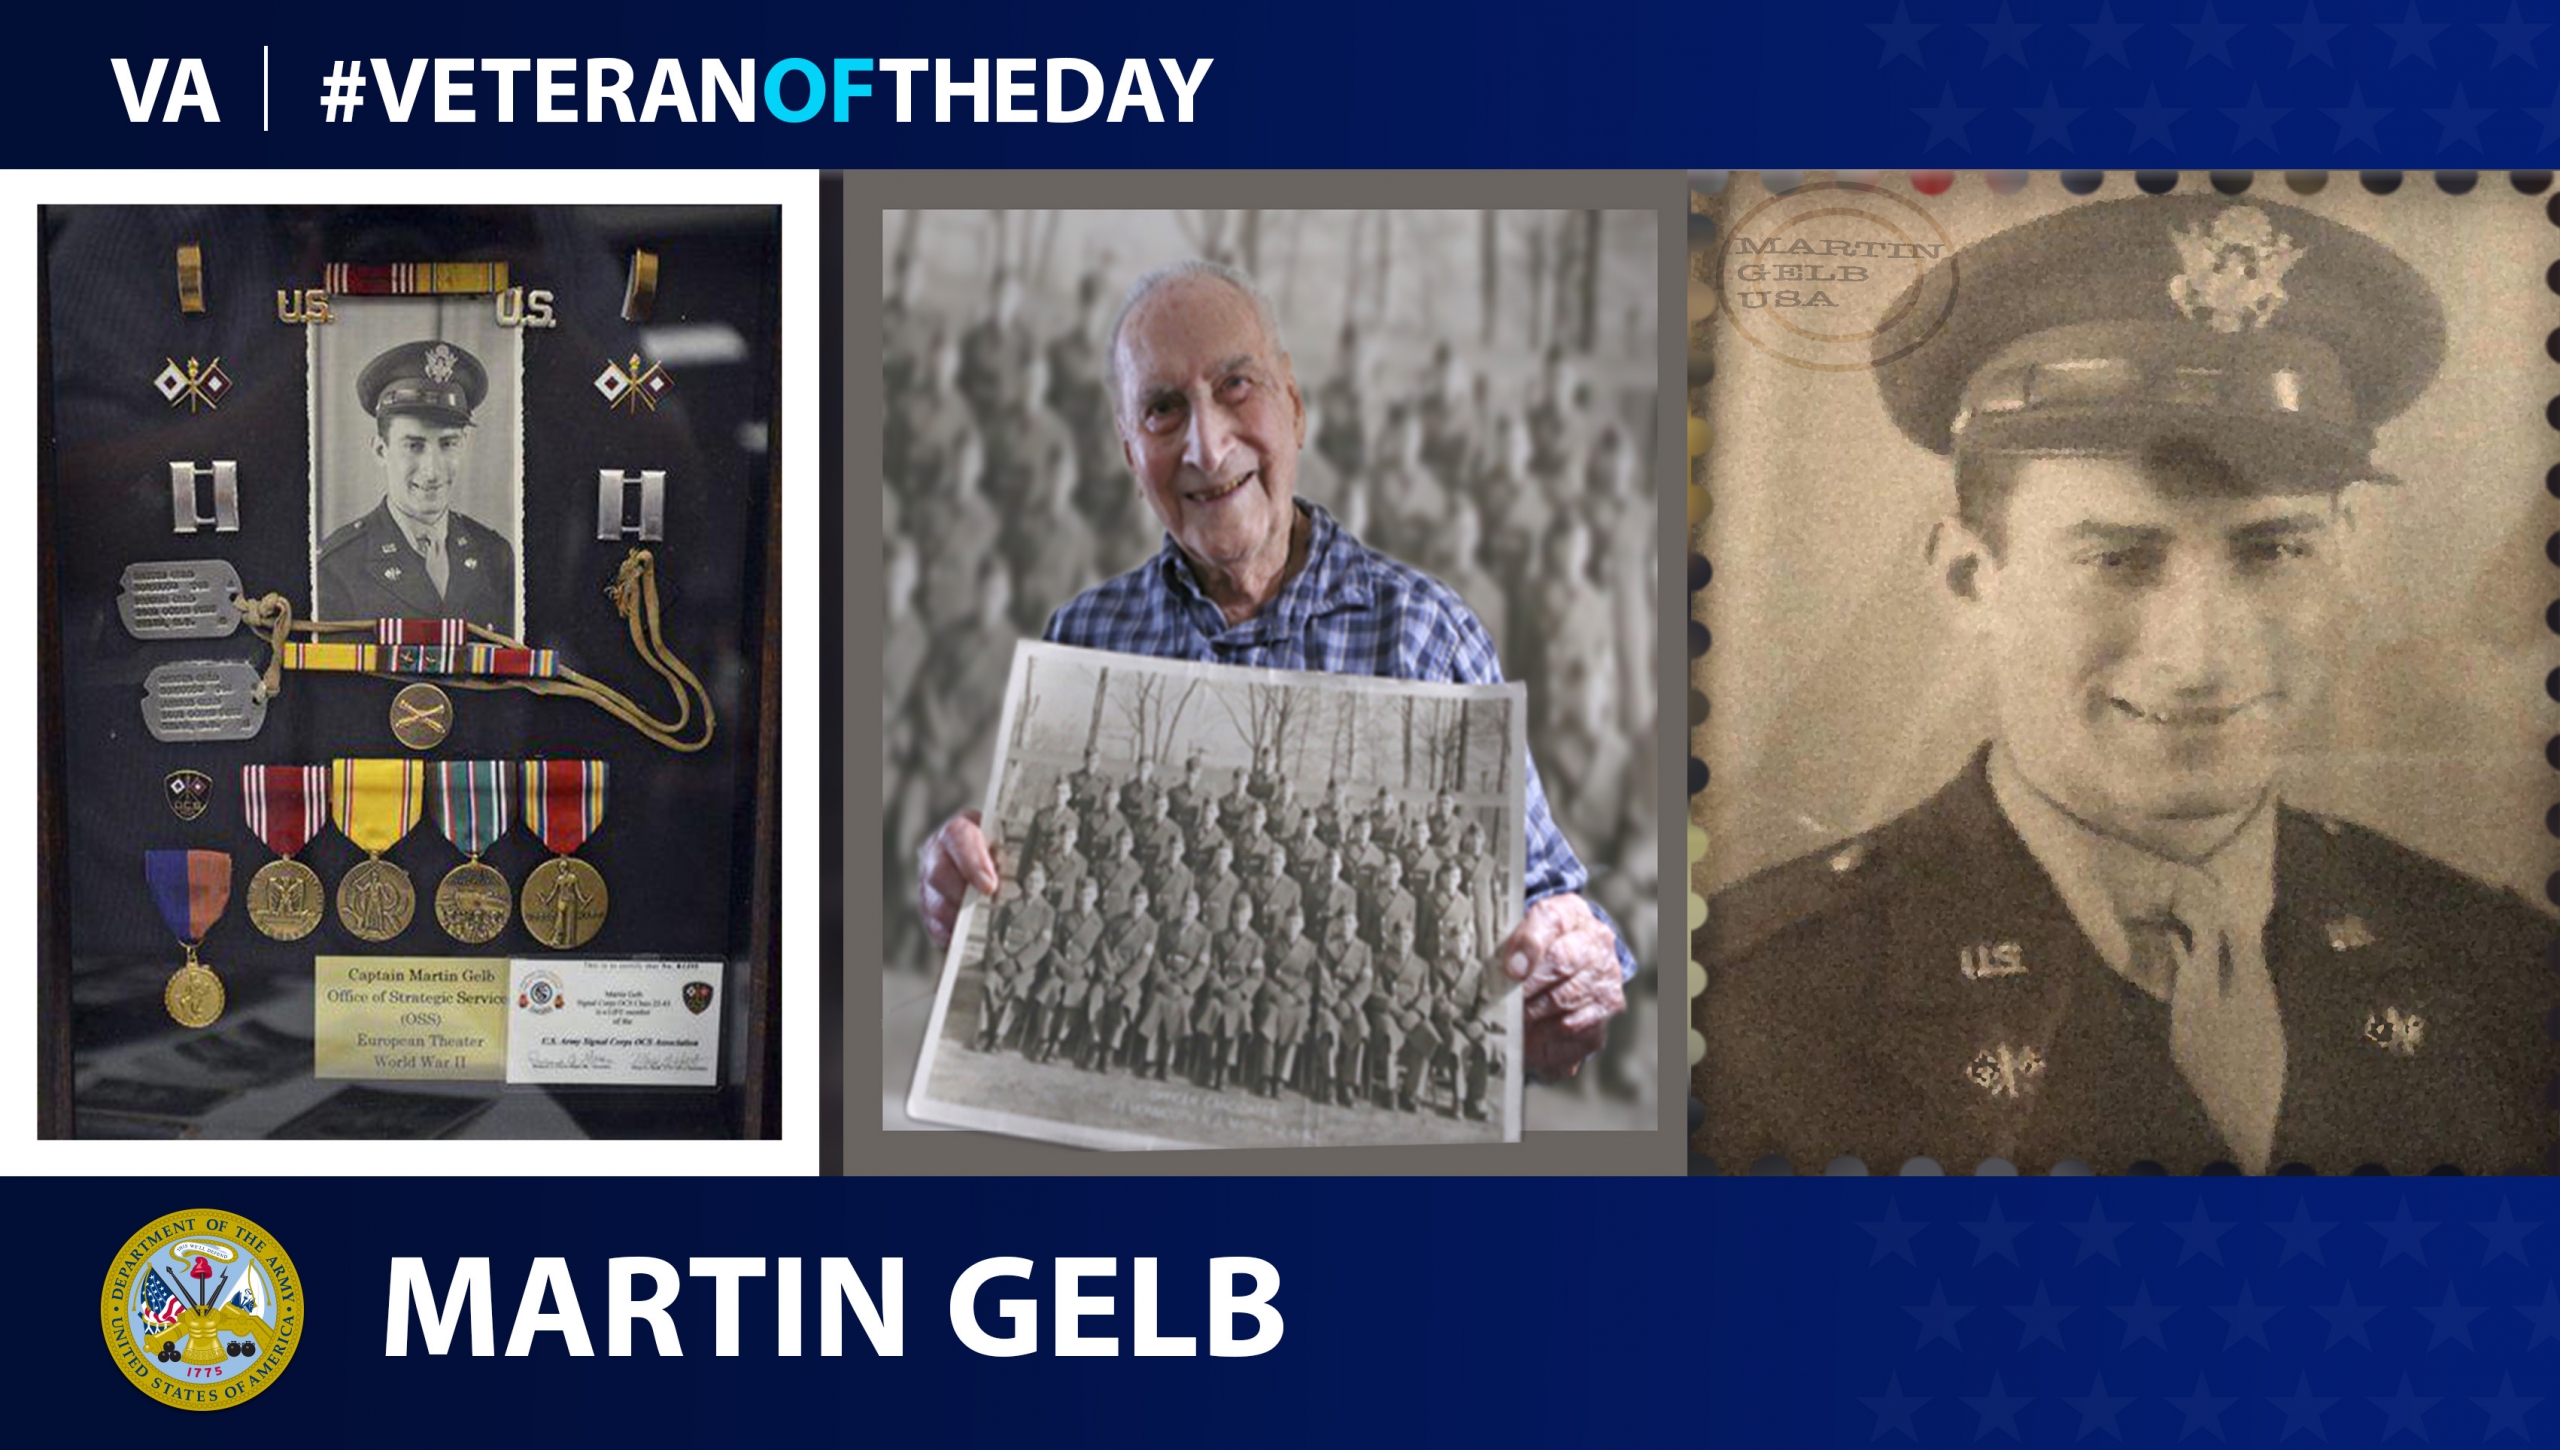 Army Veteran Martin Gelb is today's Veteran of the day.